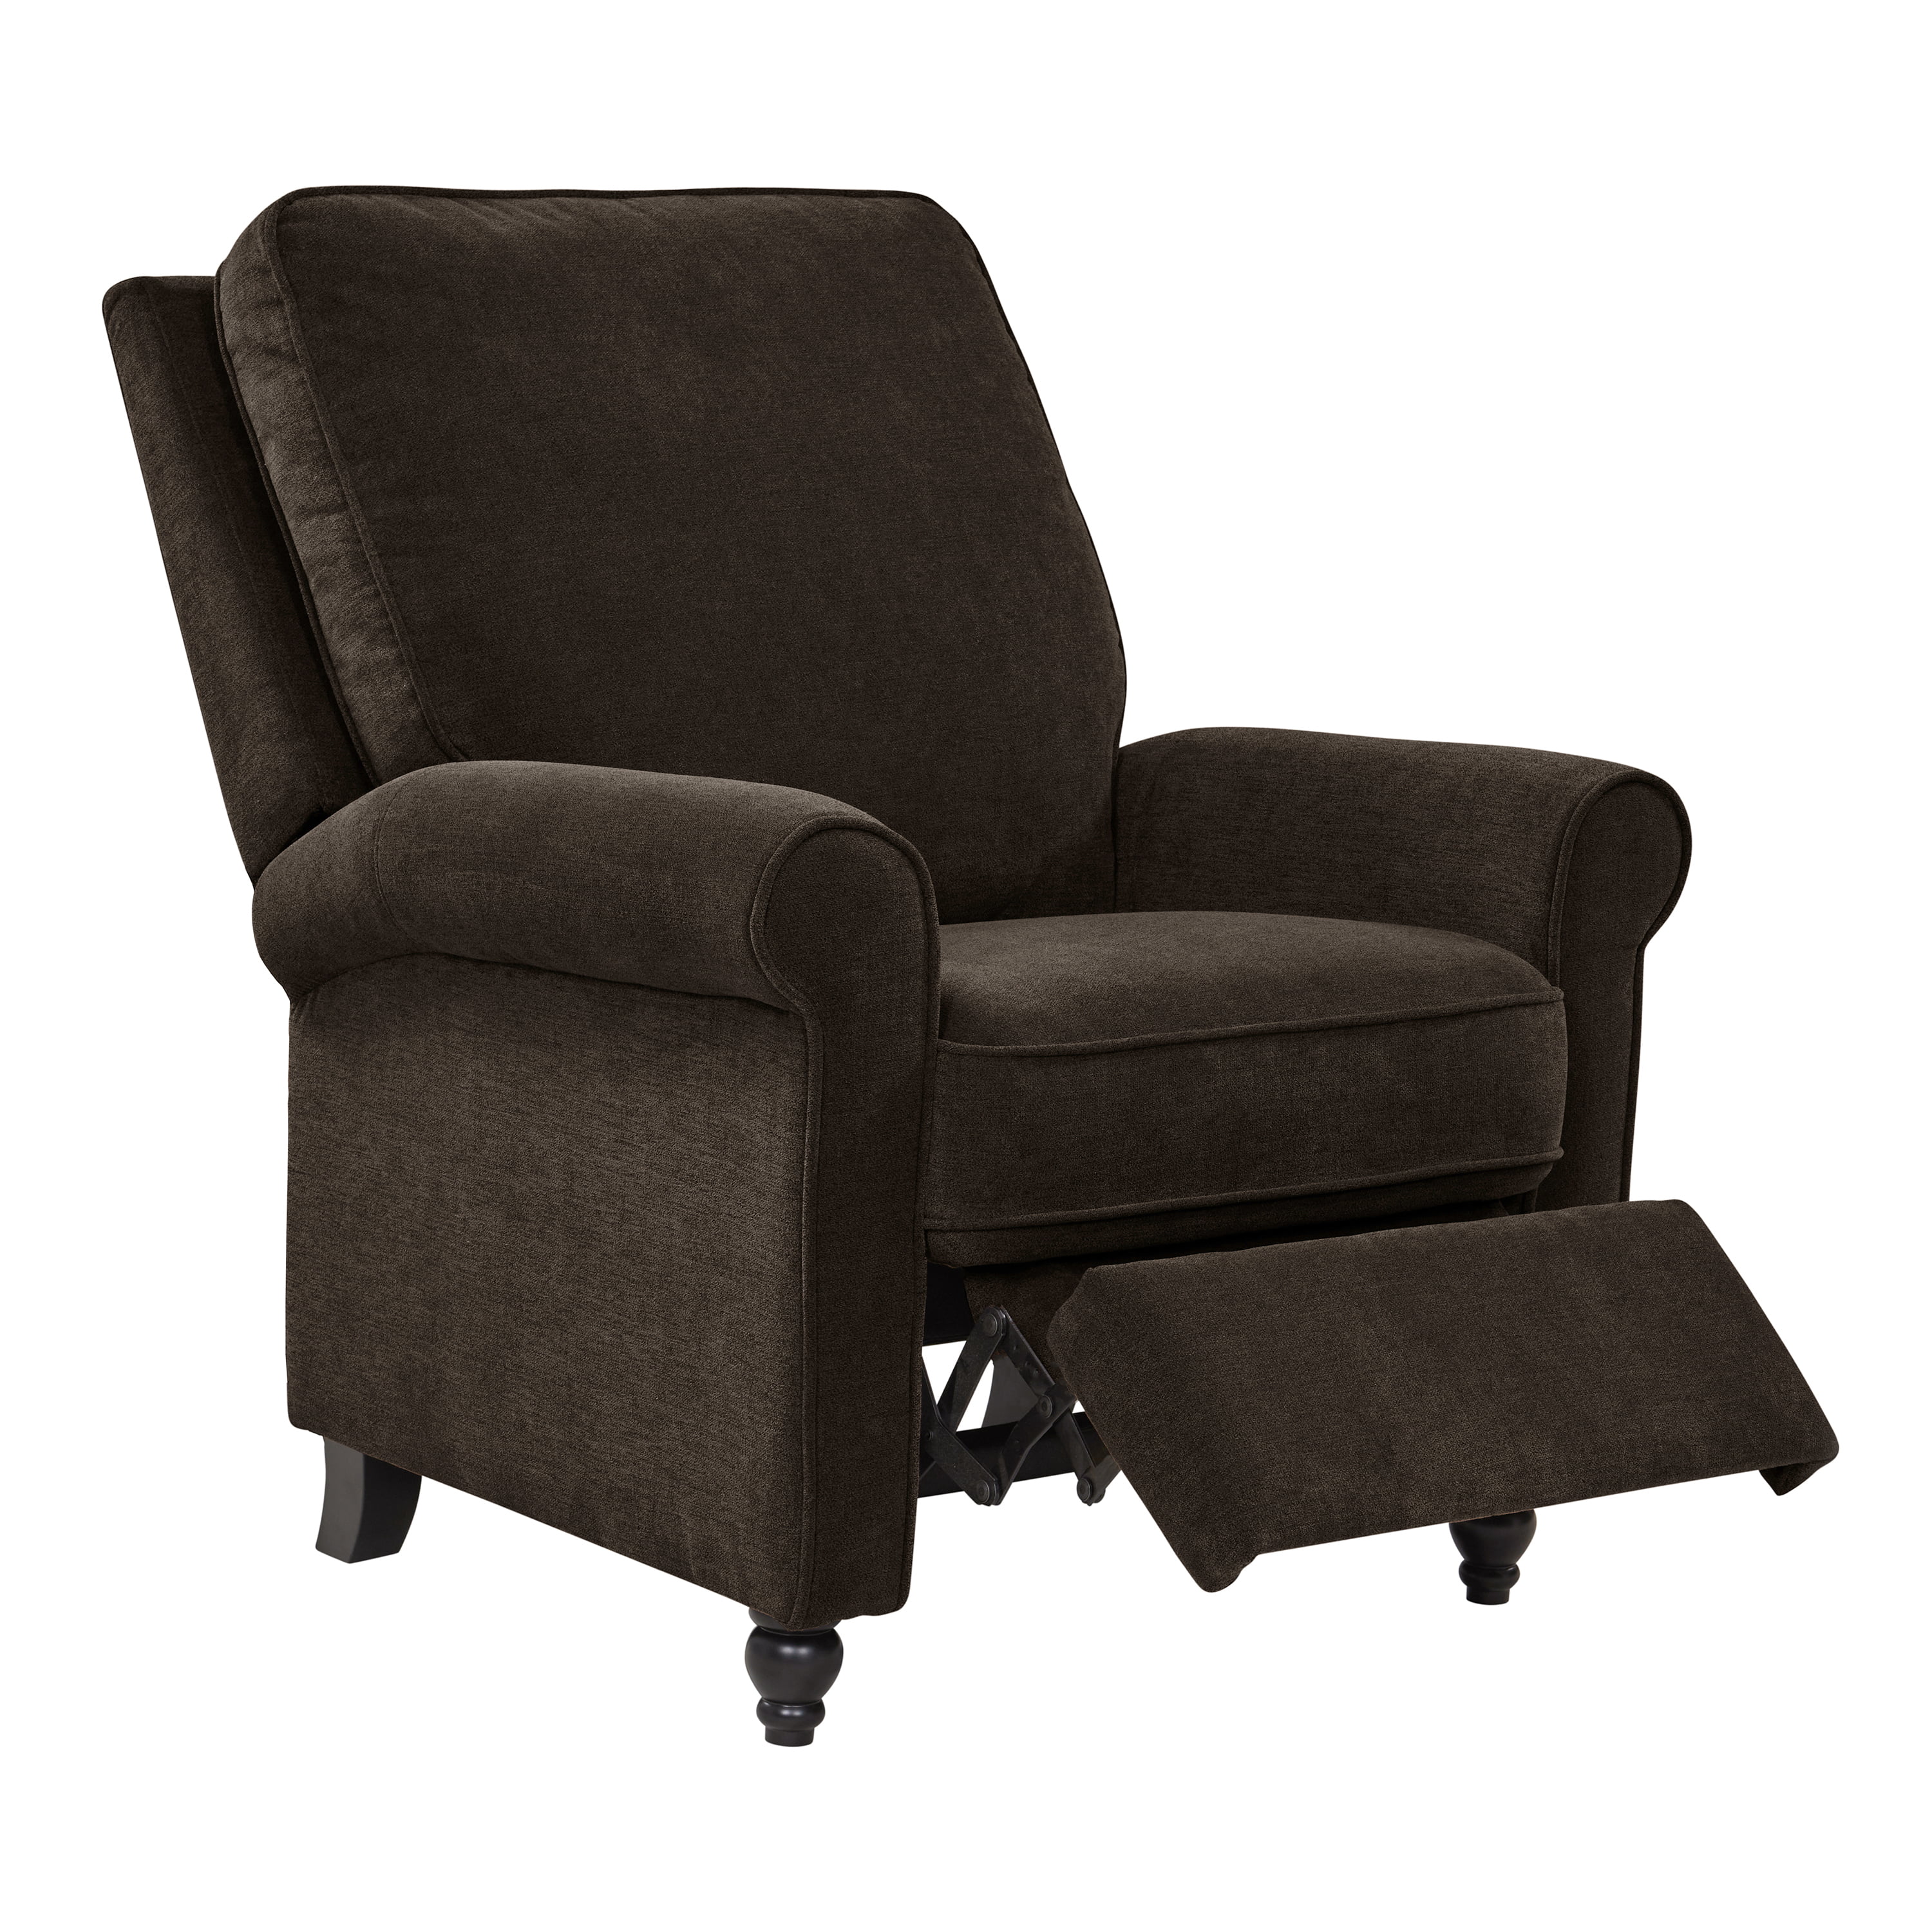 Homesvale Lincoln Push Back Recliner Chair in Chocolate